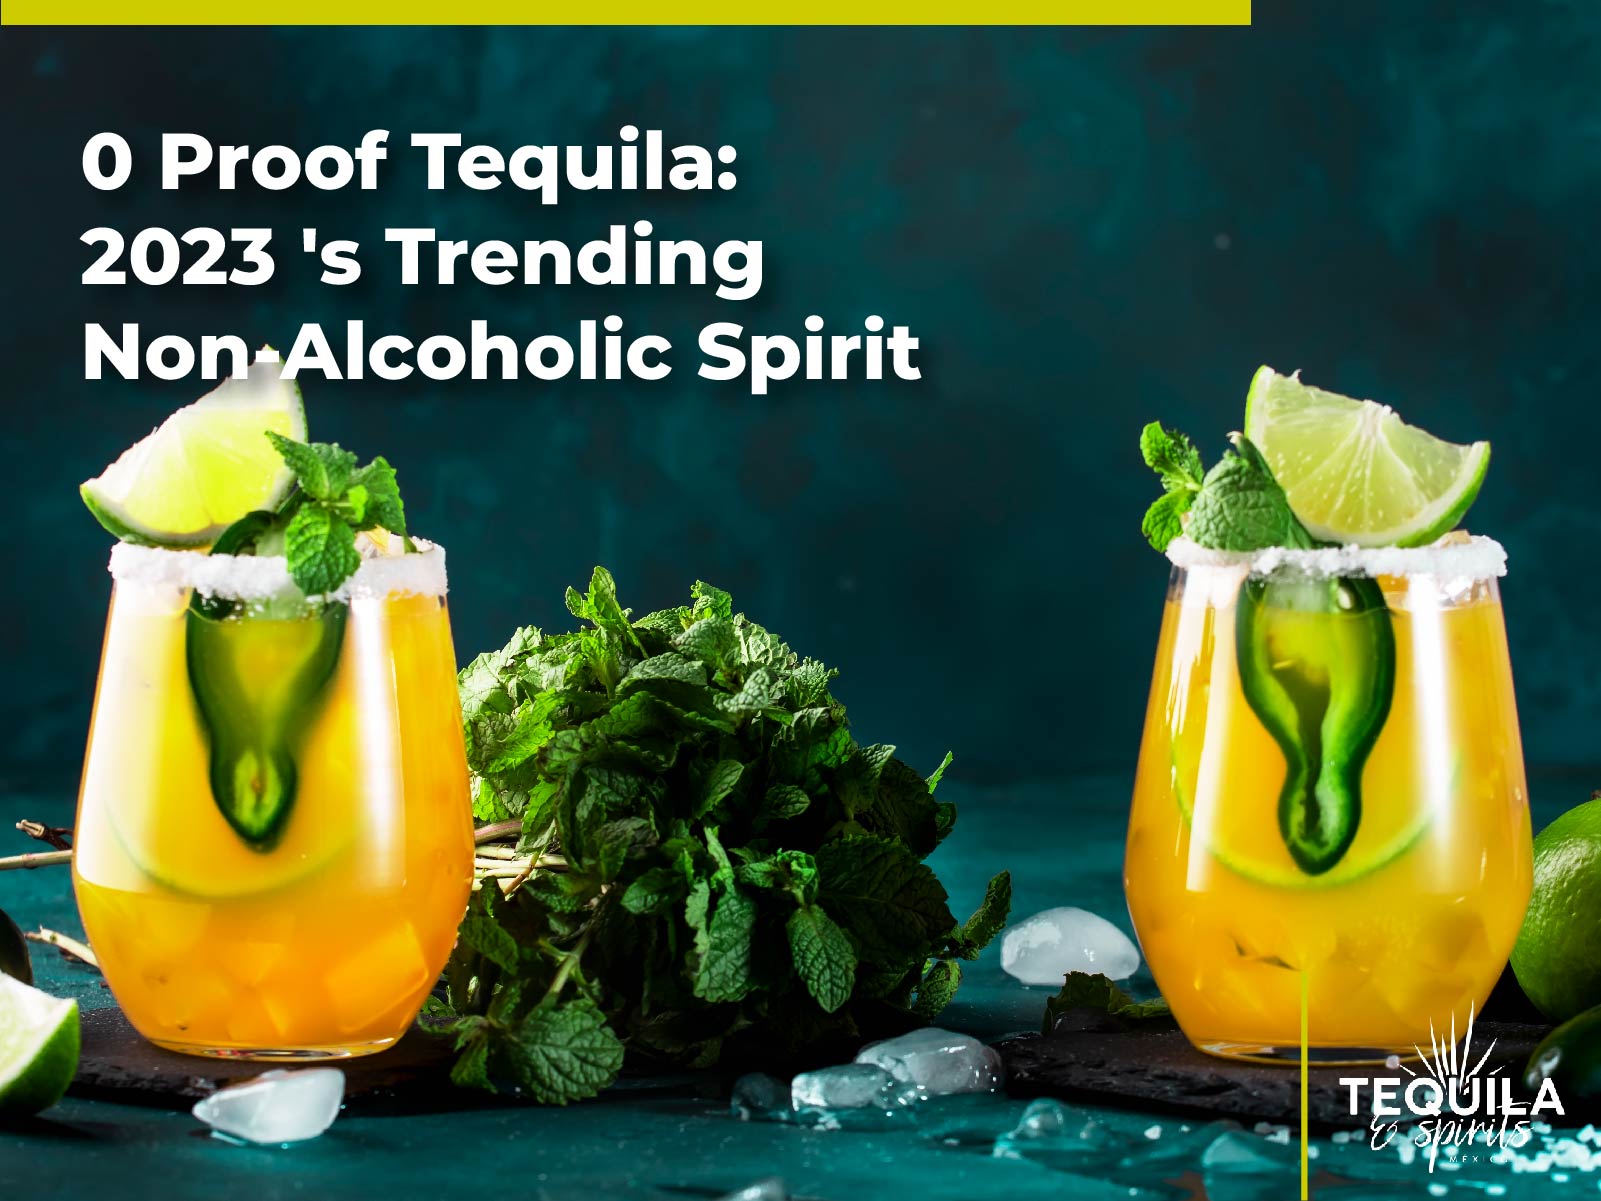 In the image there's two glasses of 0 proof tequila cocktails, decorated with lemon, chili and mint.